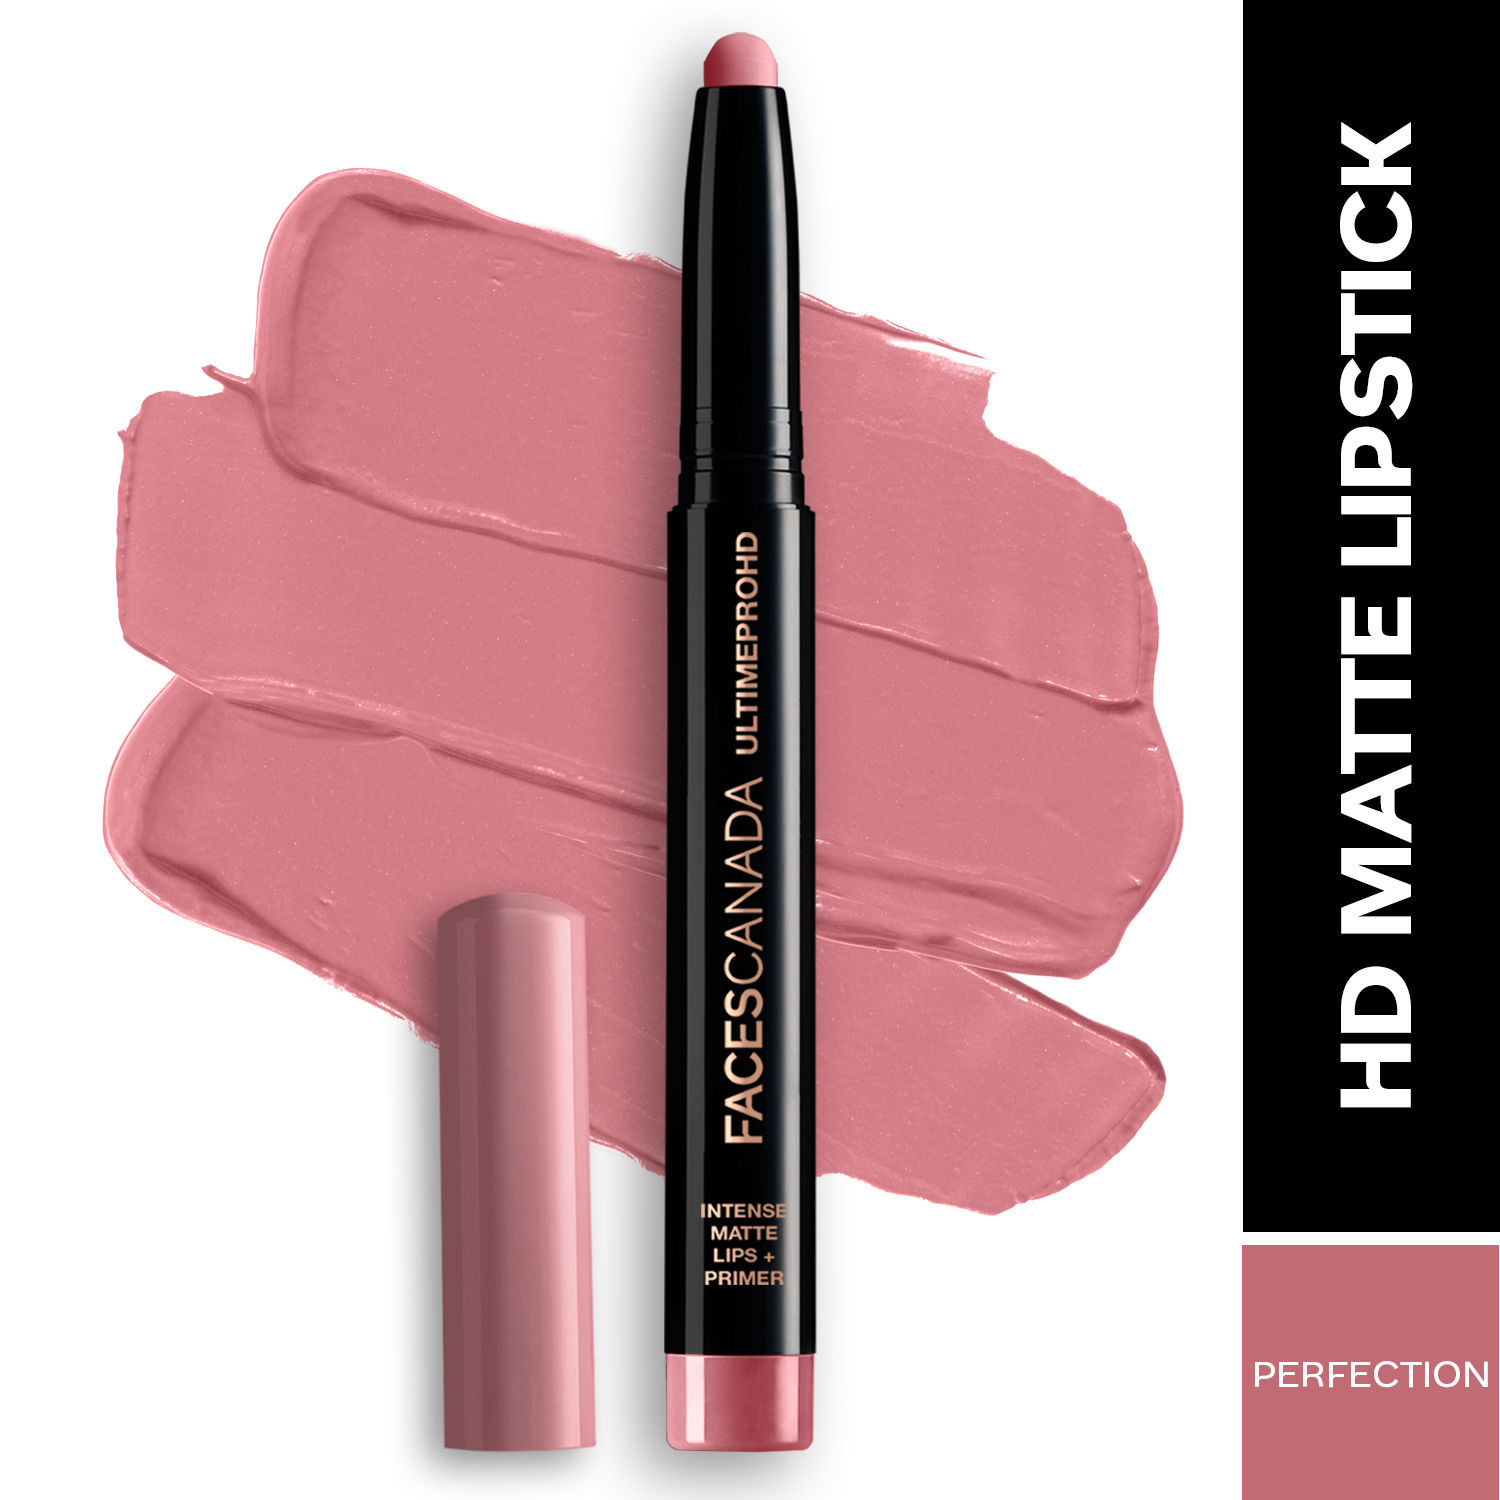 Buy FACES CANADA Ultime Pro HD Intense Matte Lipstick + Primer - Perfection, 1.4g | 9HR Long Stay | Feather-Light Comfort | Intense Color | Smooth Glide - Purplle